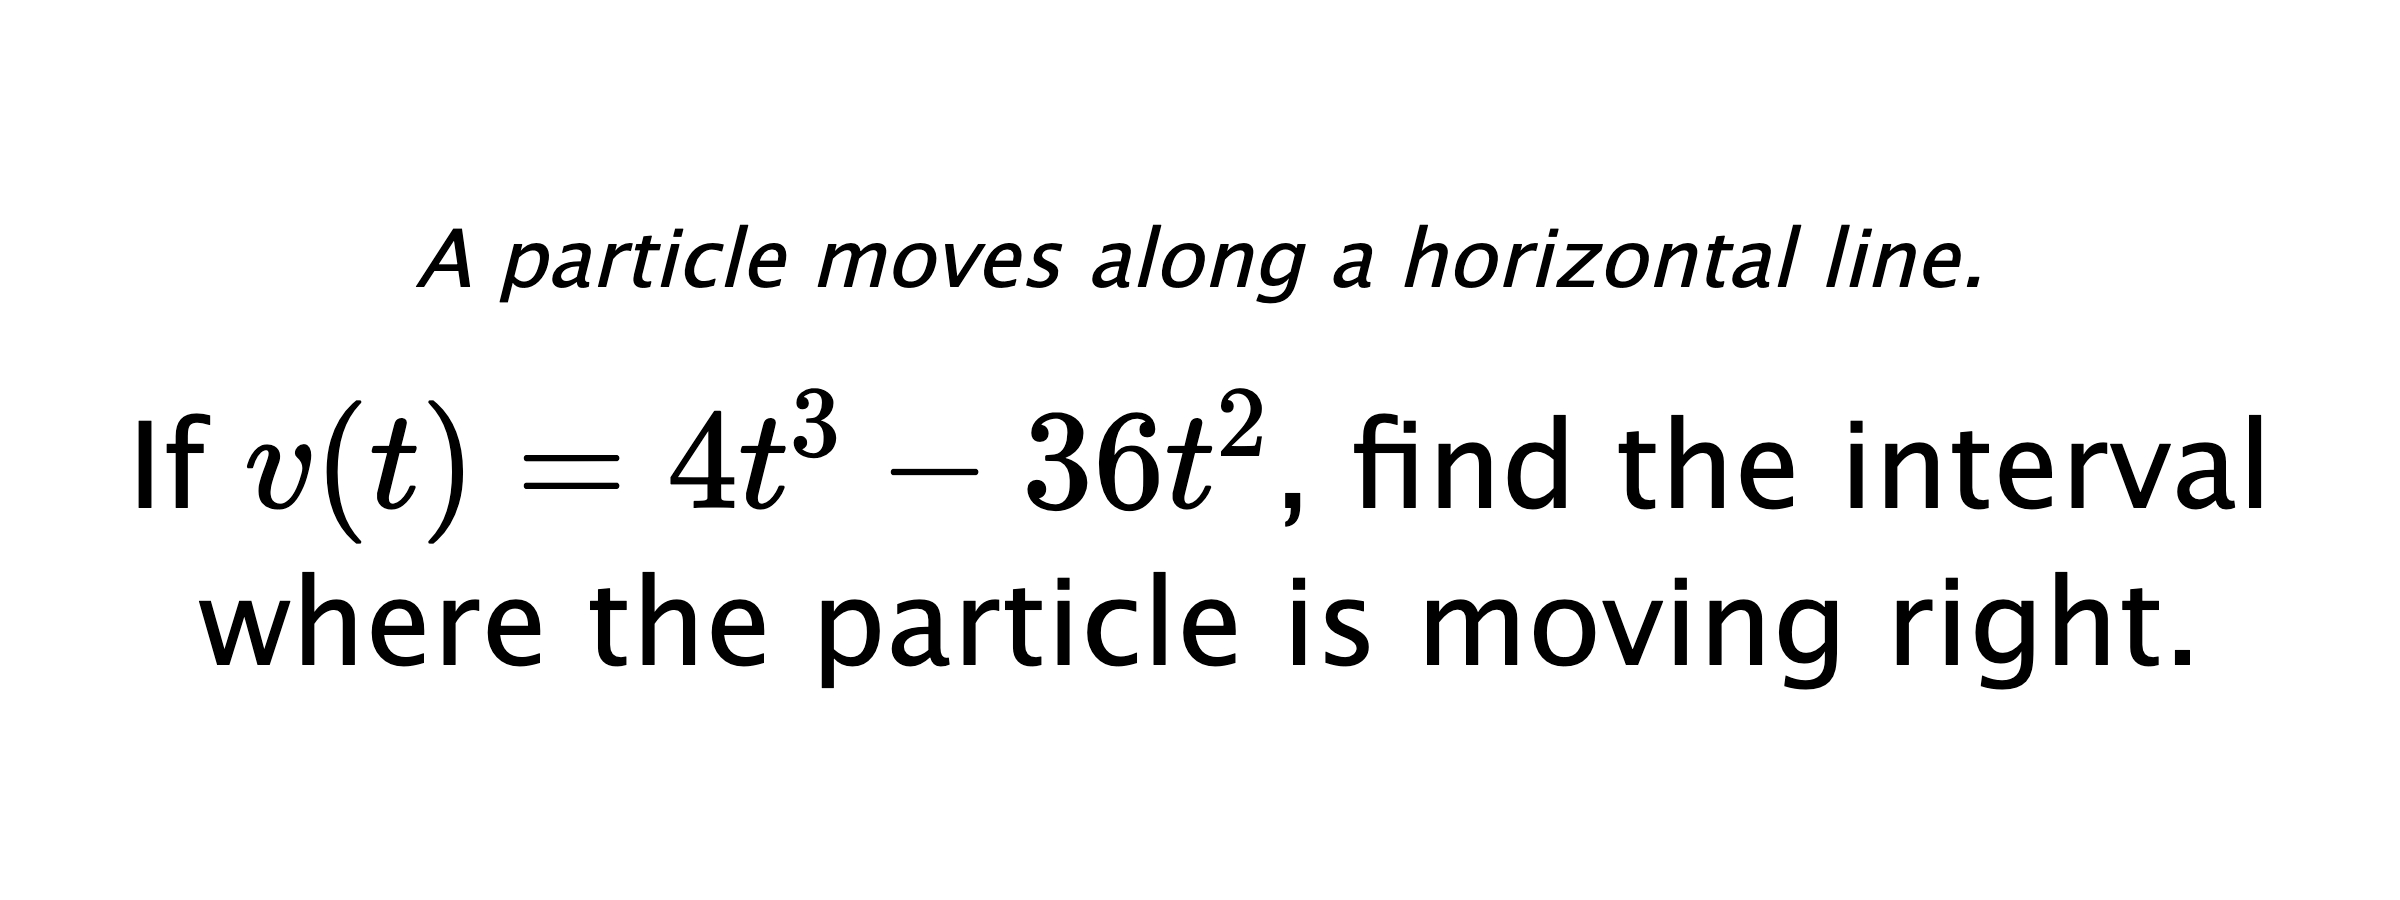 A particle moves along a horizontal line. If $ v(t)=4t^3-36t^2 $, find the interval where the particle is moving right.